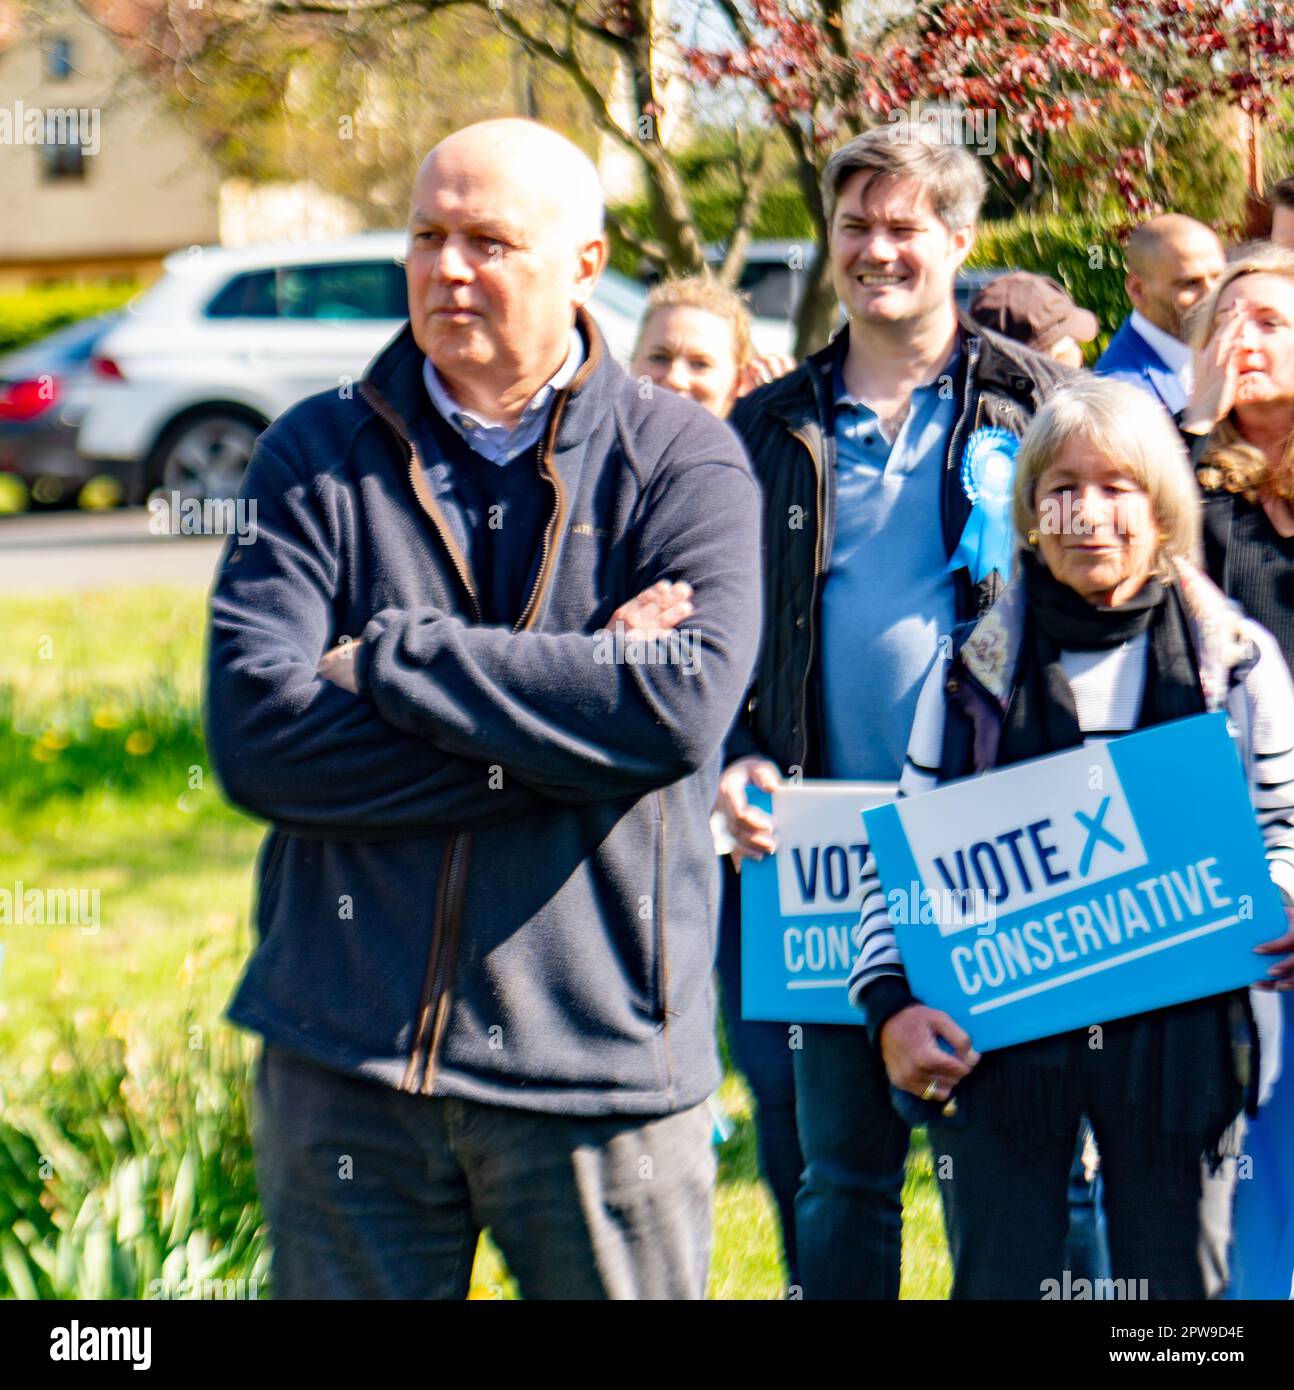 Blackmore Essex 29th Apr 2023 Sir Iain Duncan Smith MP campaiging for the conservatives in Blackmore Essex for the forthcoming local council elections. Credit: Ian Davidson/Alamy Live News Stock Photo